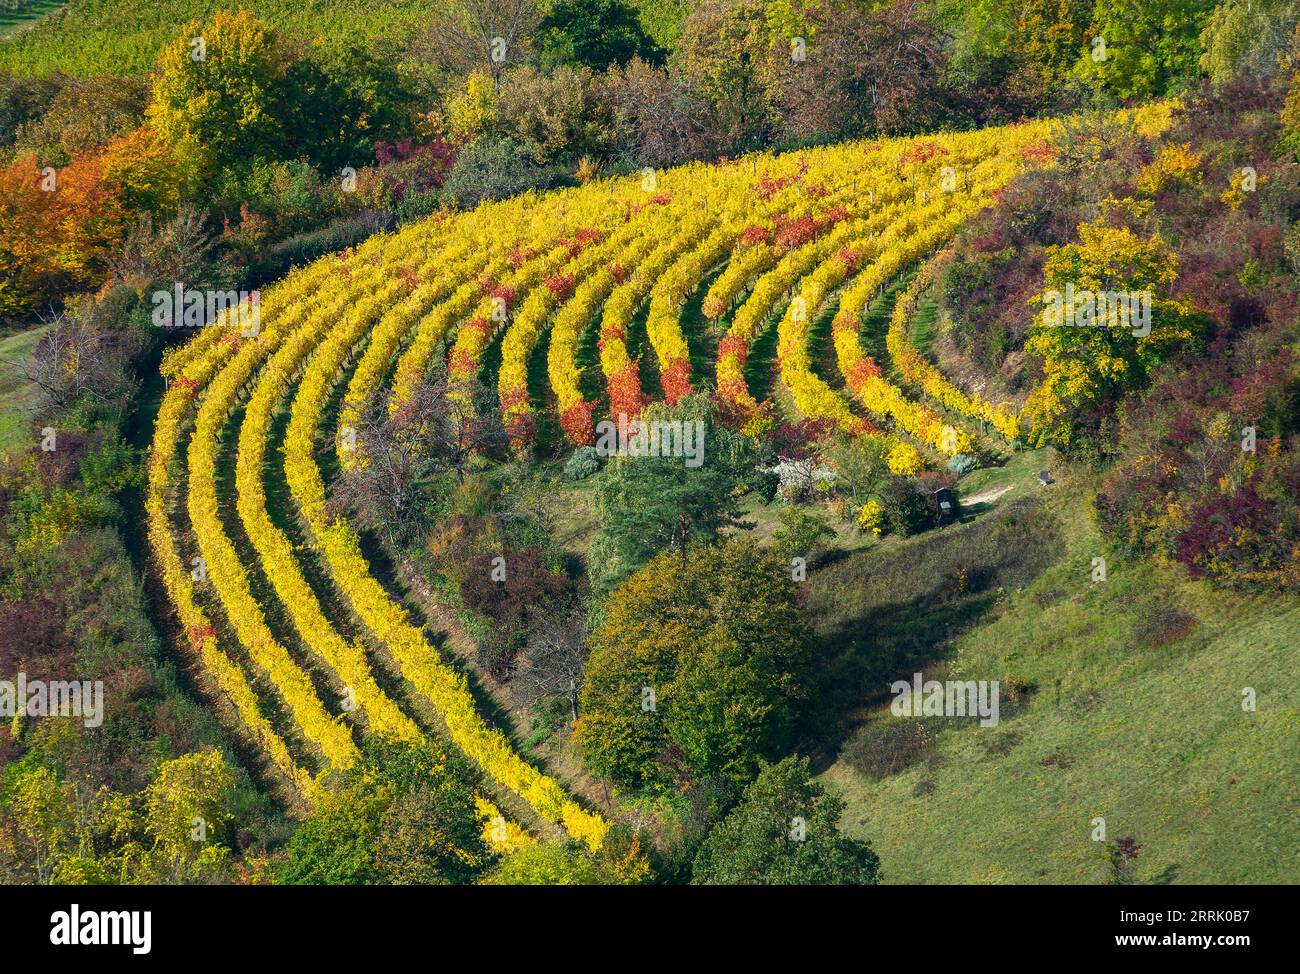 Autumn in the vineyards of Neuffen. The vineyards are located on the Albtrauf below the ruin Hohenneuffen, Neuffen, Germany Stock Photo